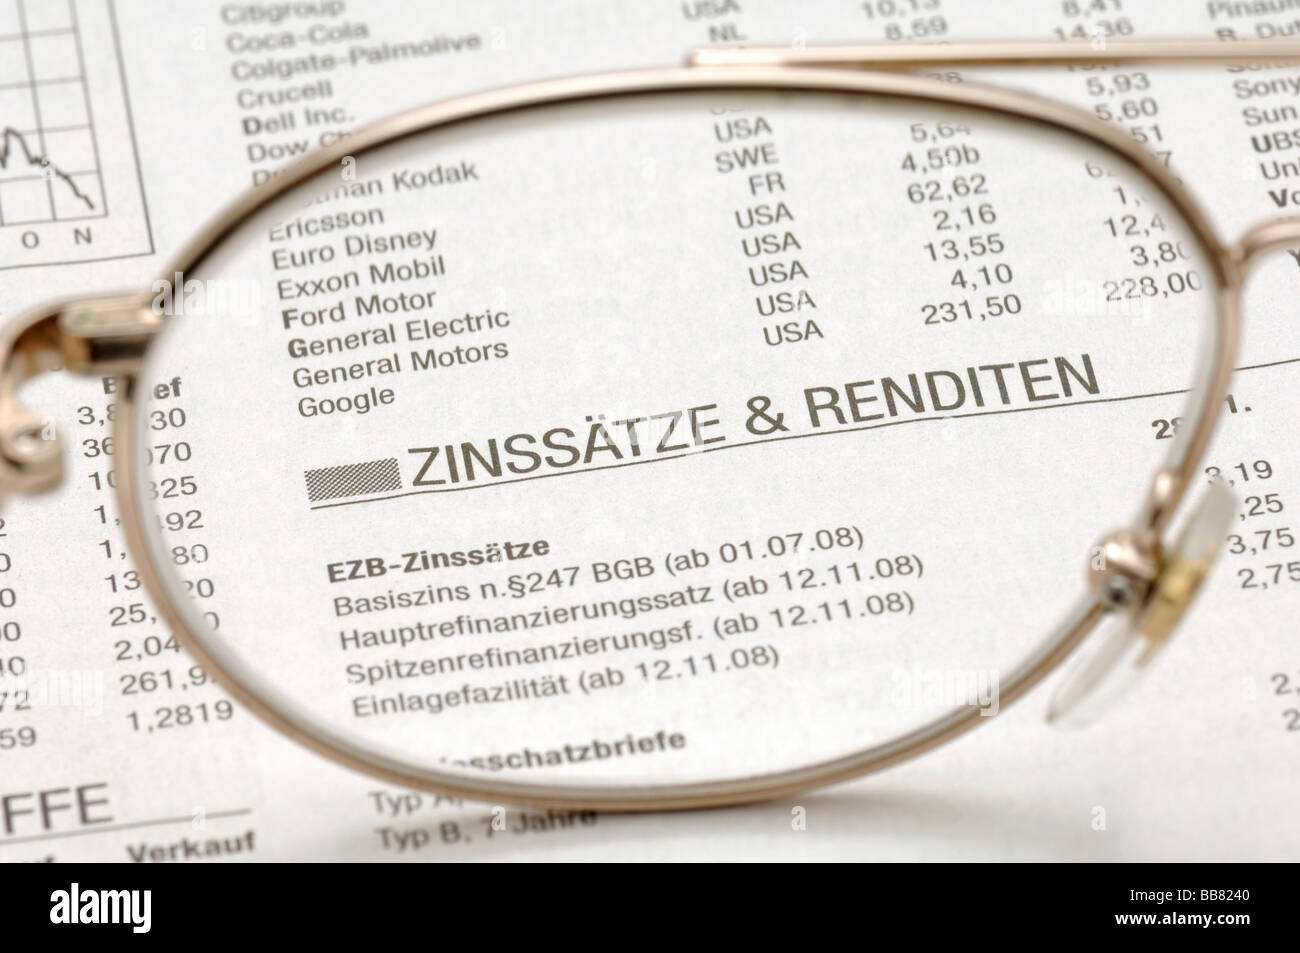 Glasses on the business section of a newspaper, stock exchange, symbolic picture for business Stock Photo